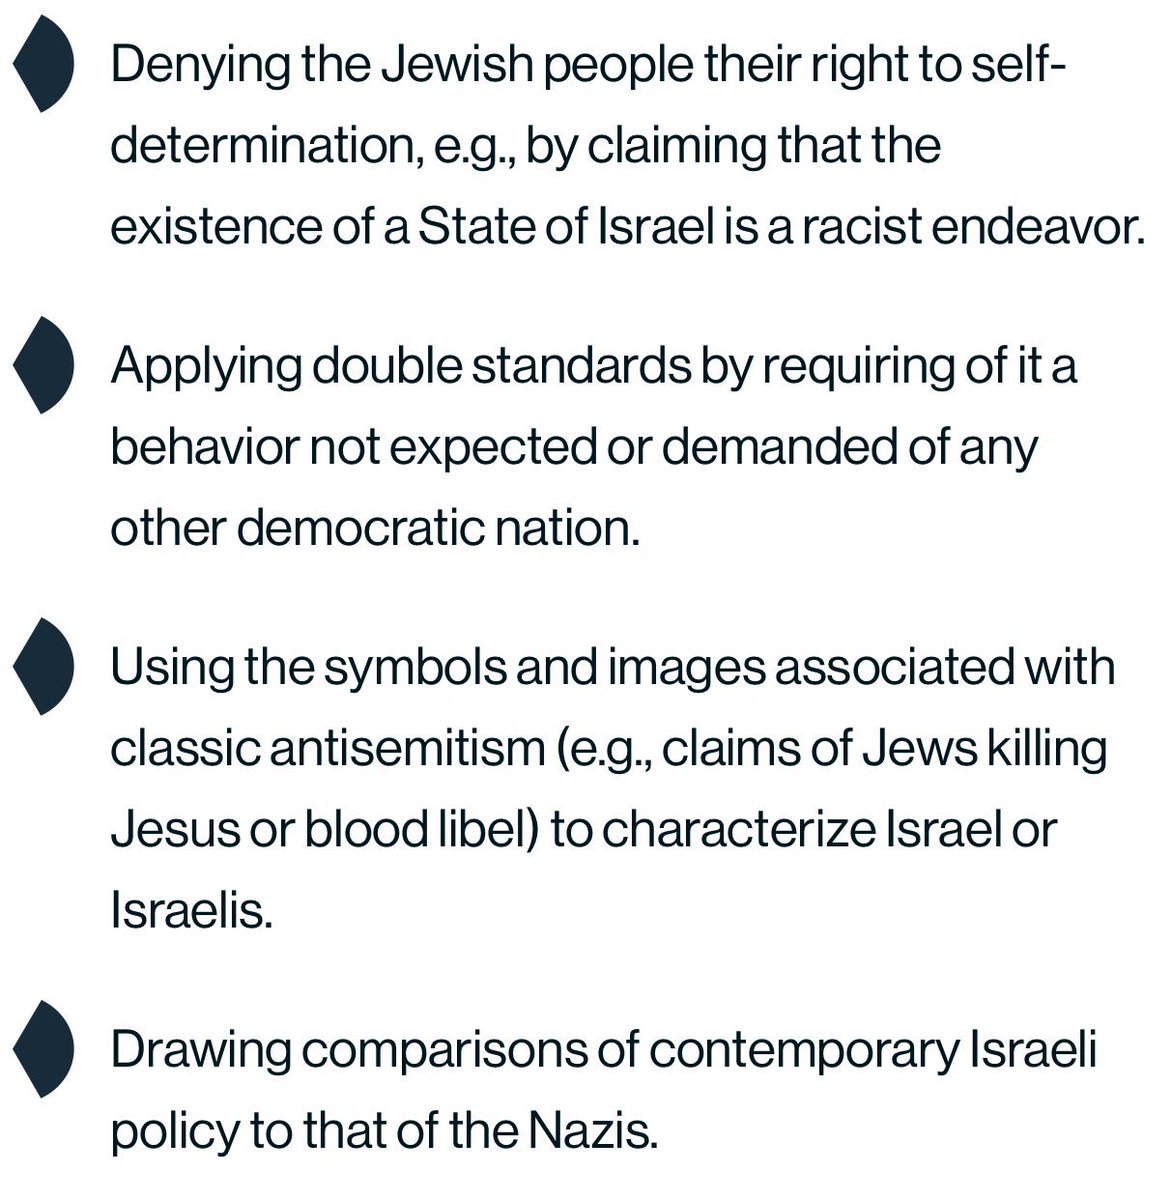 The GOP-controlled House just voted to make these things illegal (which makes several passages in the Bible illegal)

This was clearly pushed by AIPAC/Israeli govt, but it’s so over-the-top that it will obviously lead to intensified Jew-hatred. 

Very weird. I have a theory.